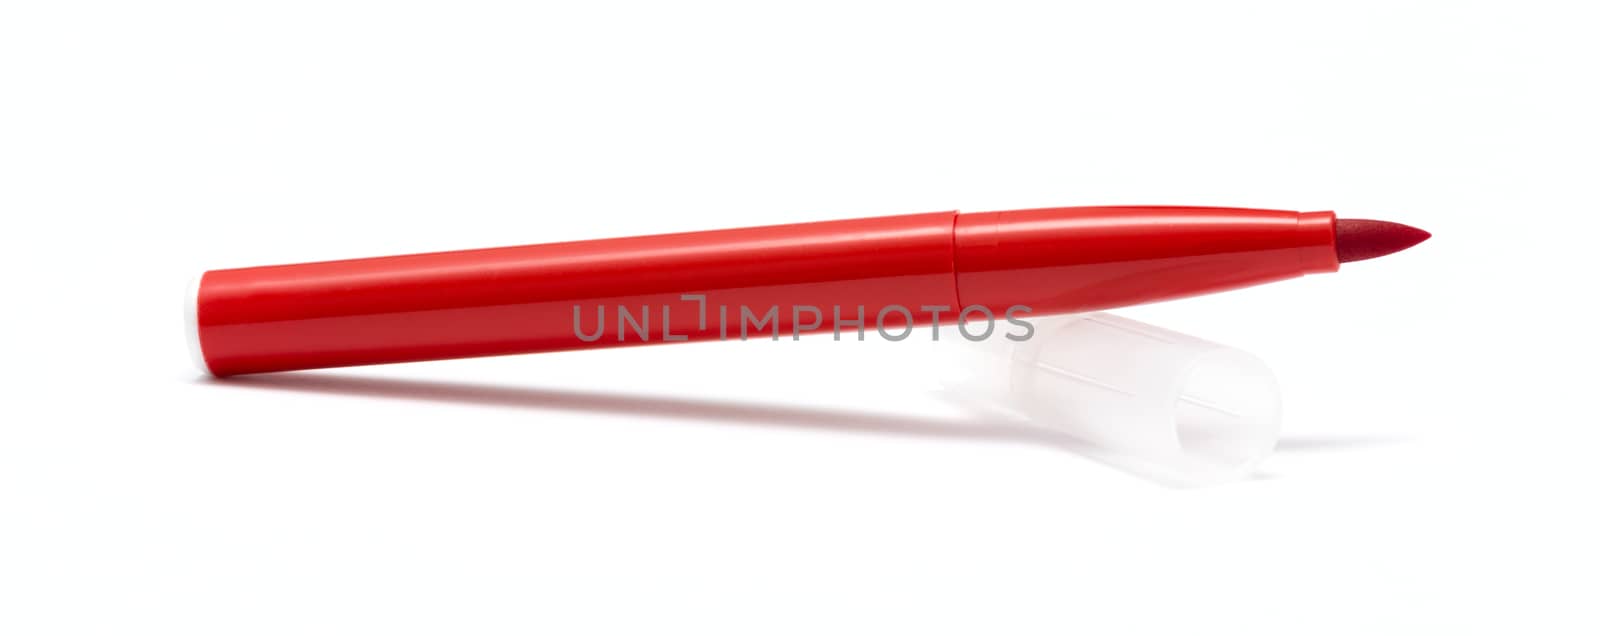 Red marker isolated on white background